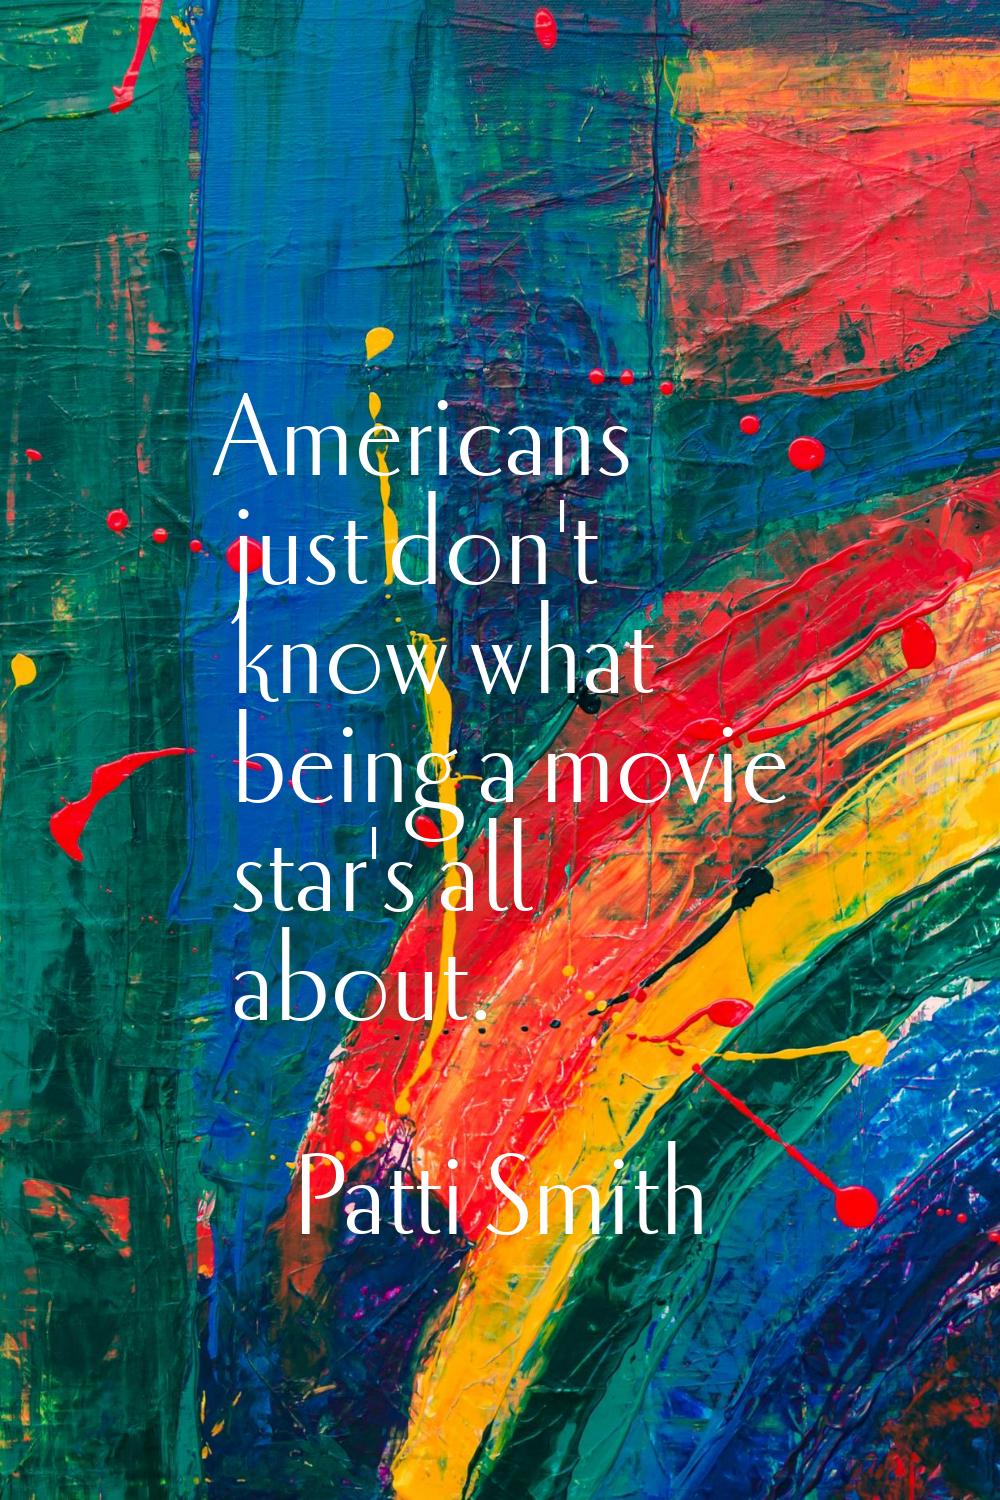 Americans just don't know what being a movie star's all about.